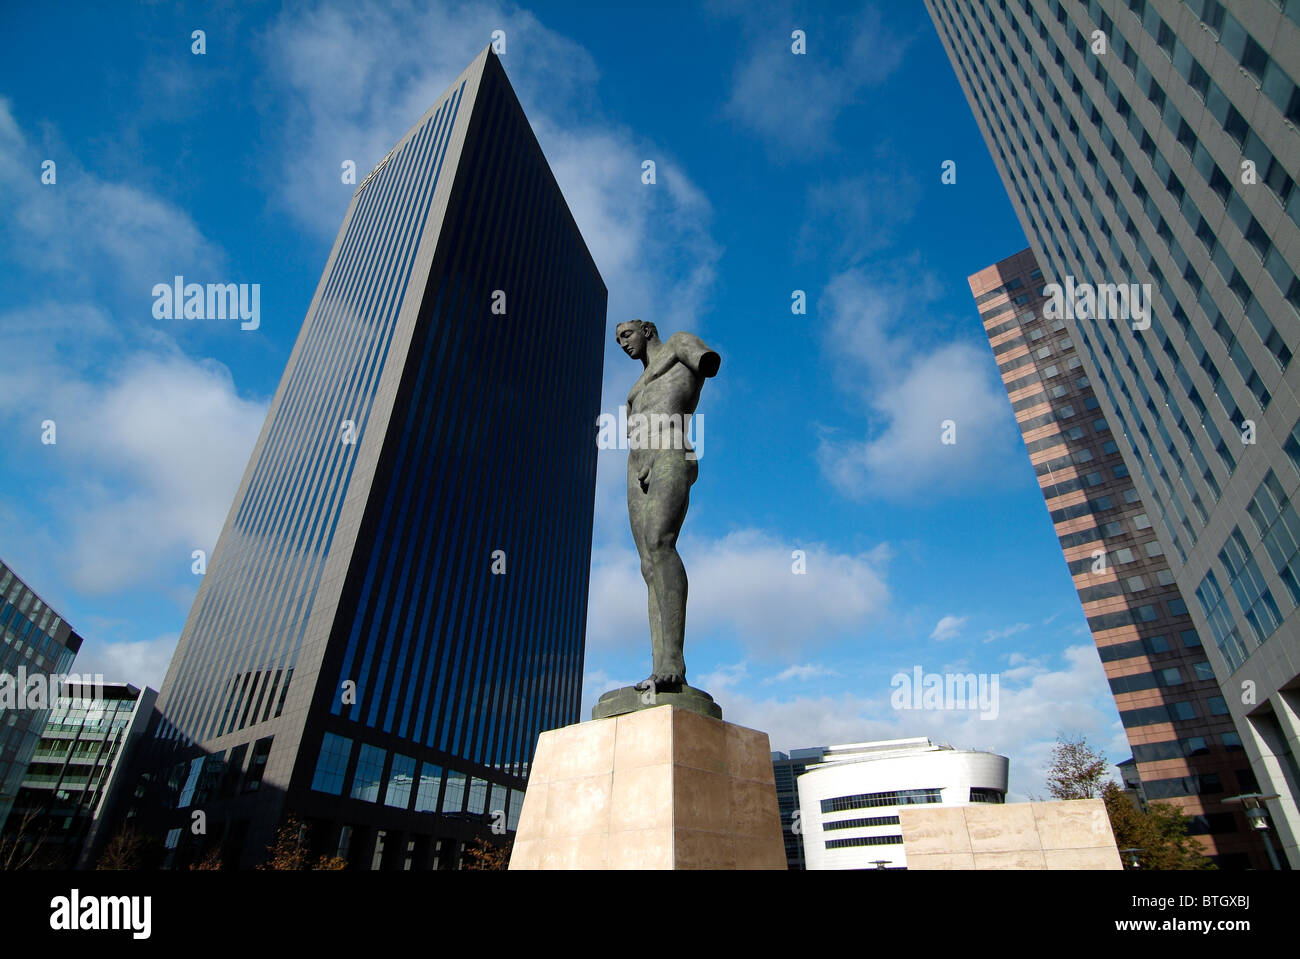 Statue in La Défense district in Paris, Capital of France Stock Photo